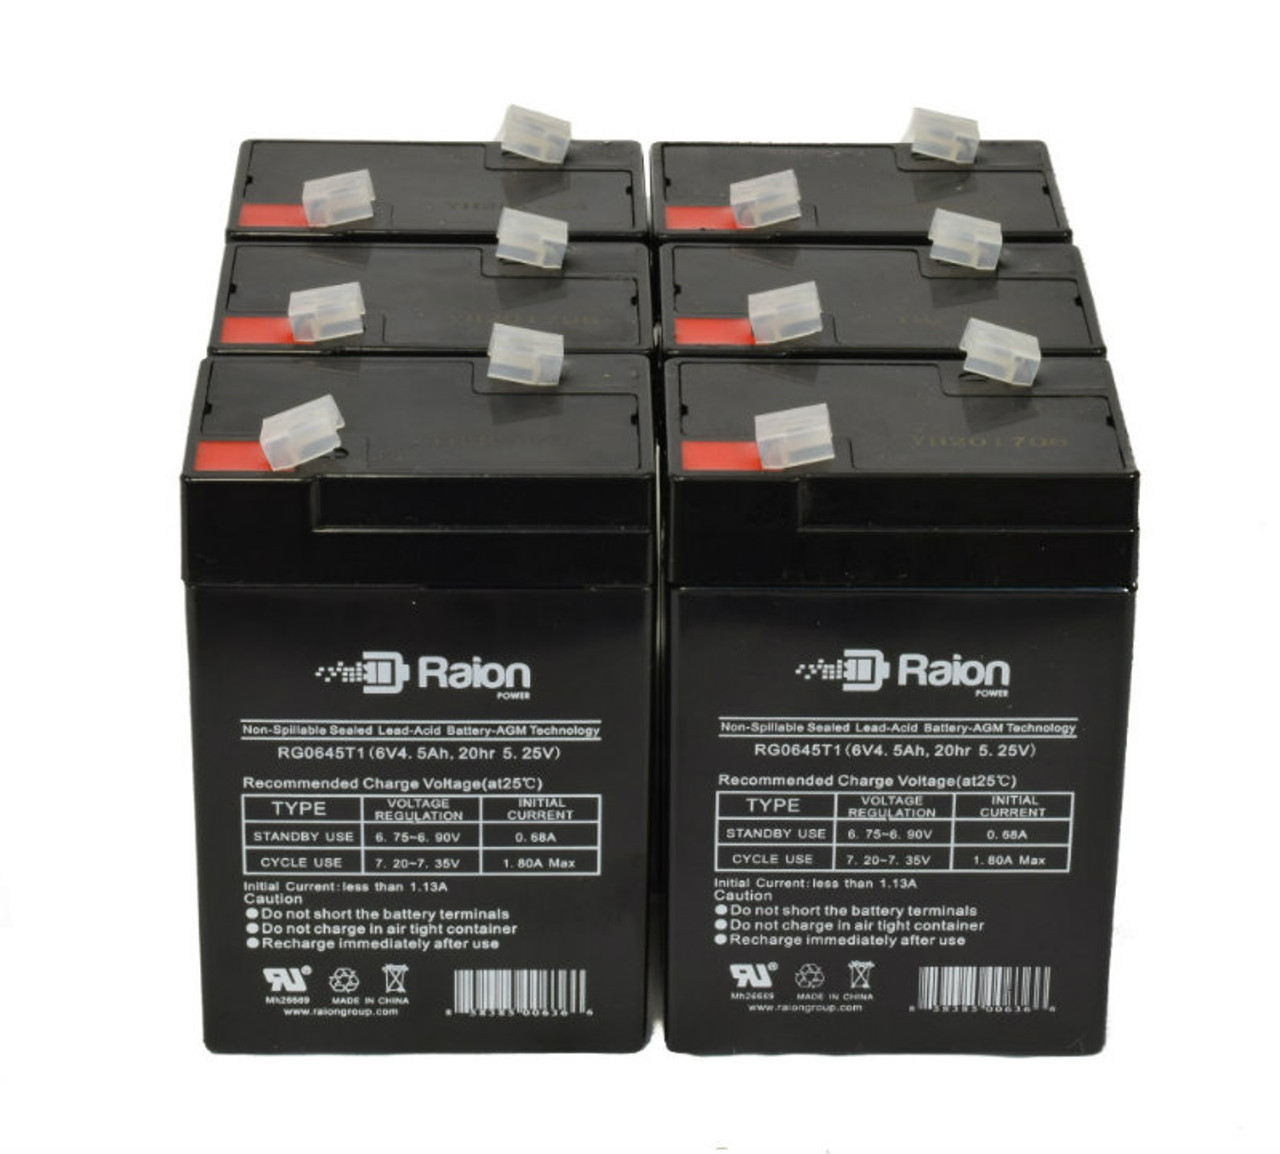 Raion Power 6V 4.5Ah Replacement Emergency Light Battery for Light Alarms 660.0004 - 6 Pack